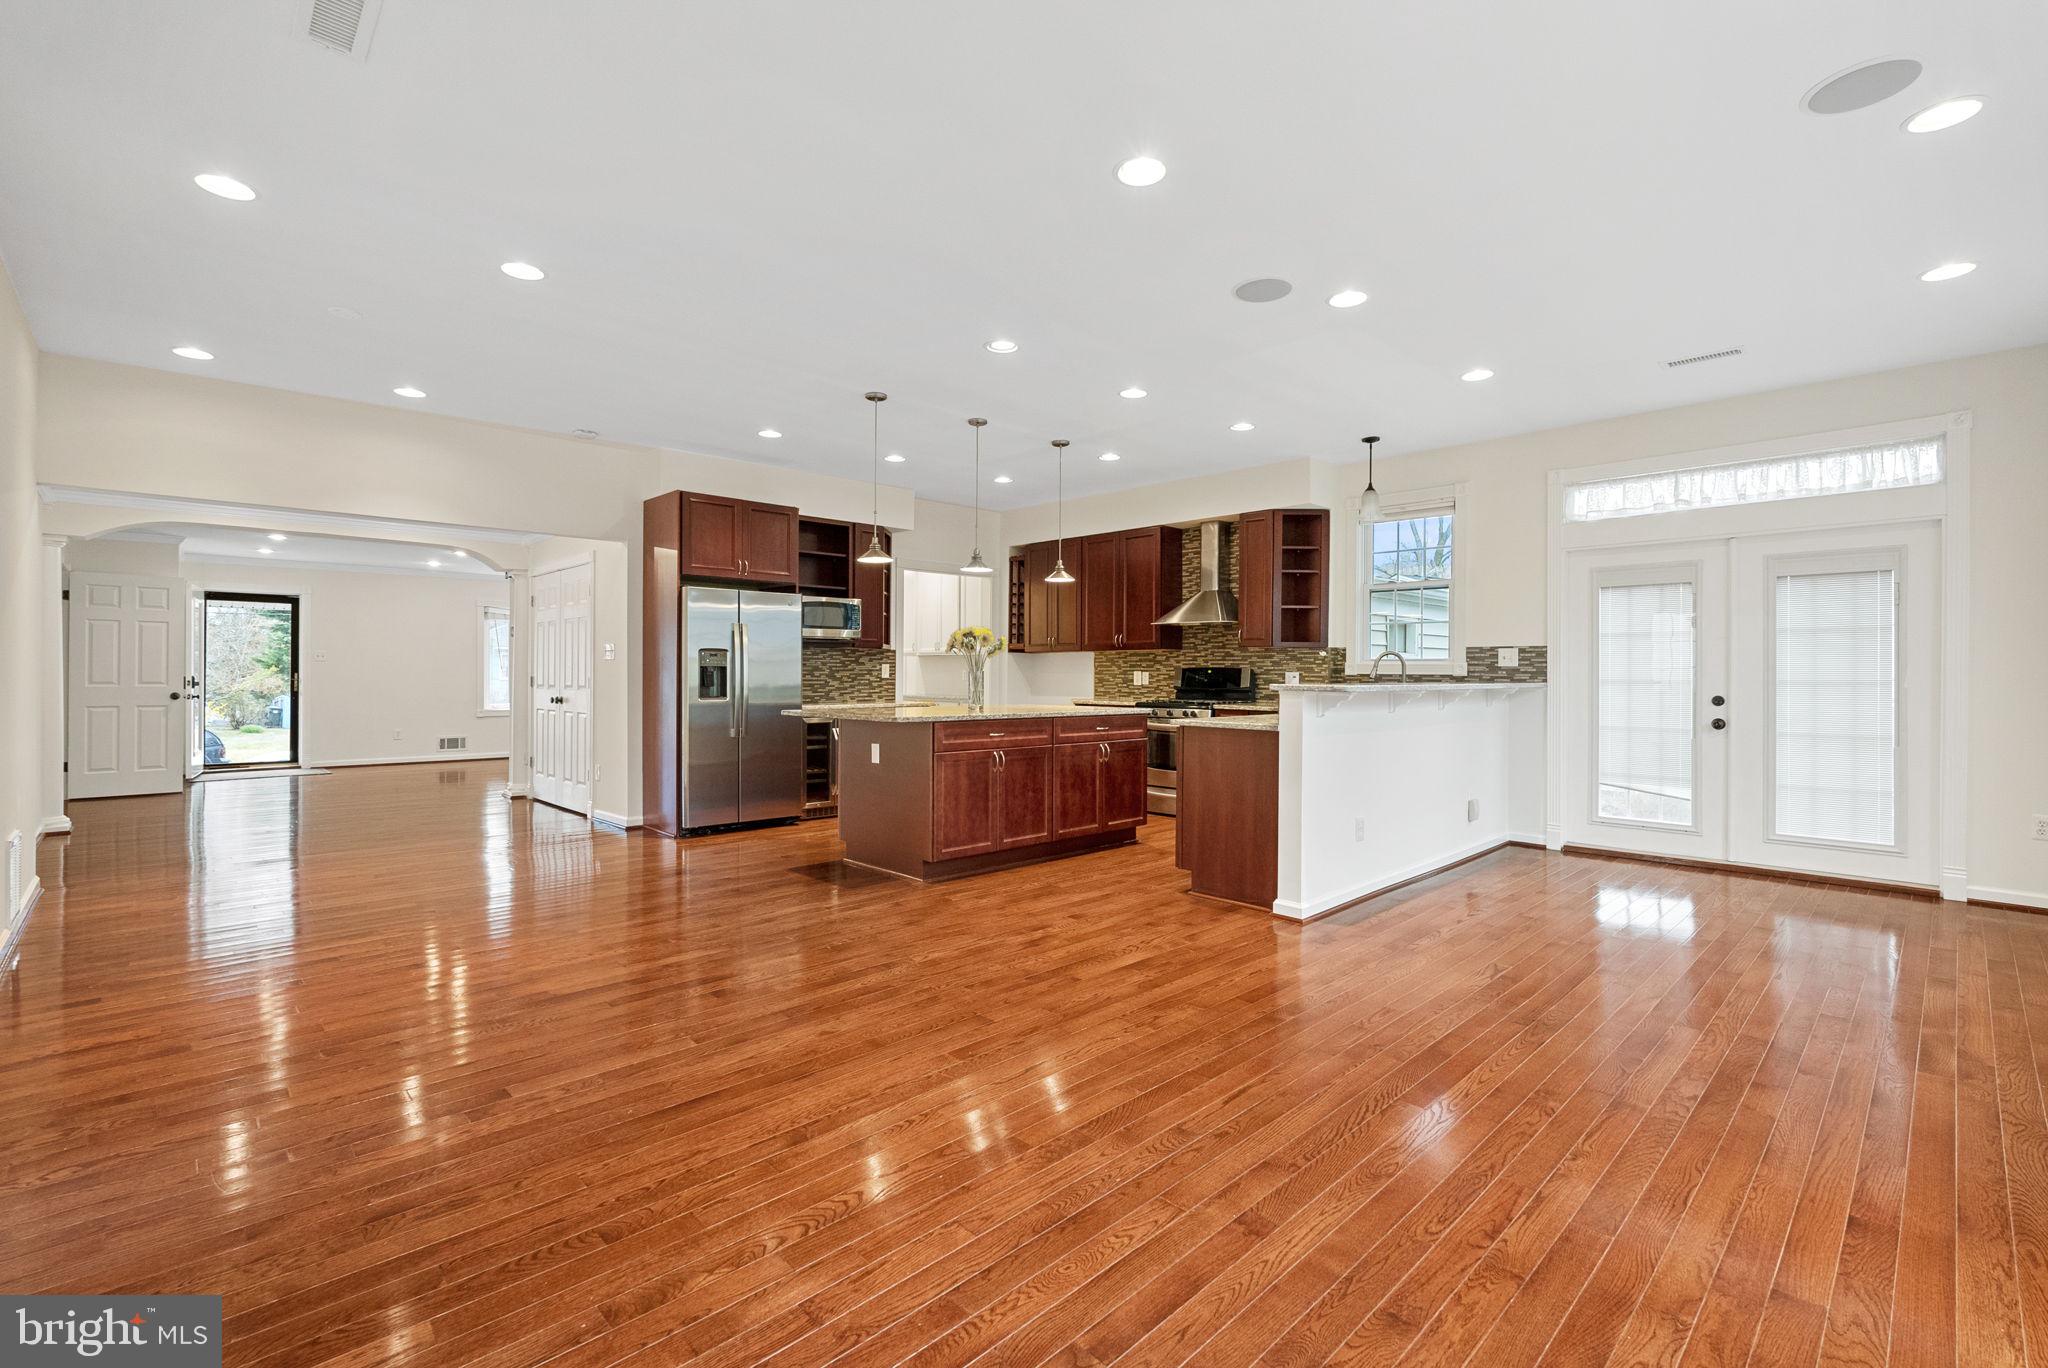 a view of kitchen with kitchen island wooden floor and stainless steel appliances